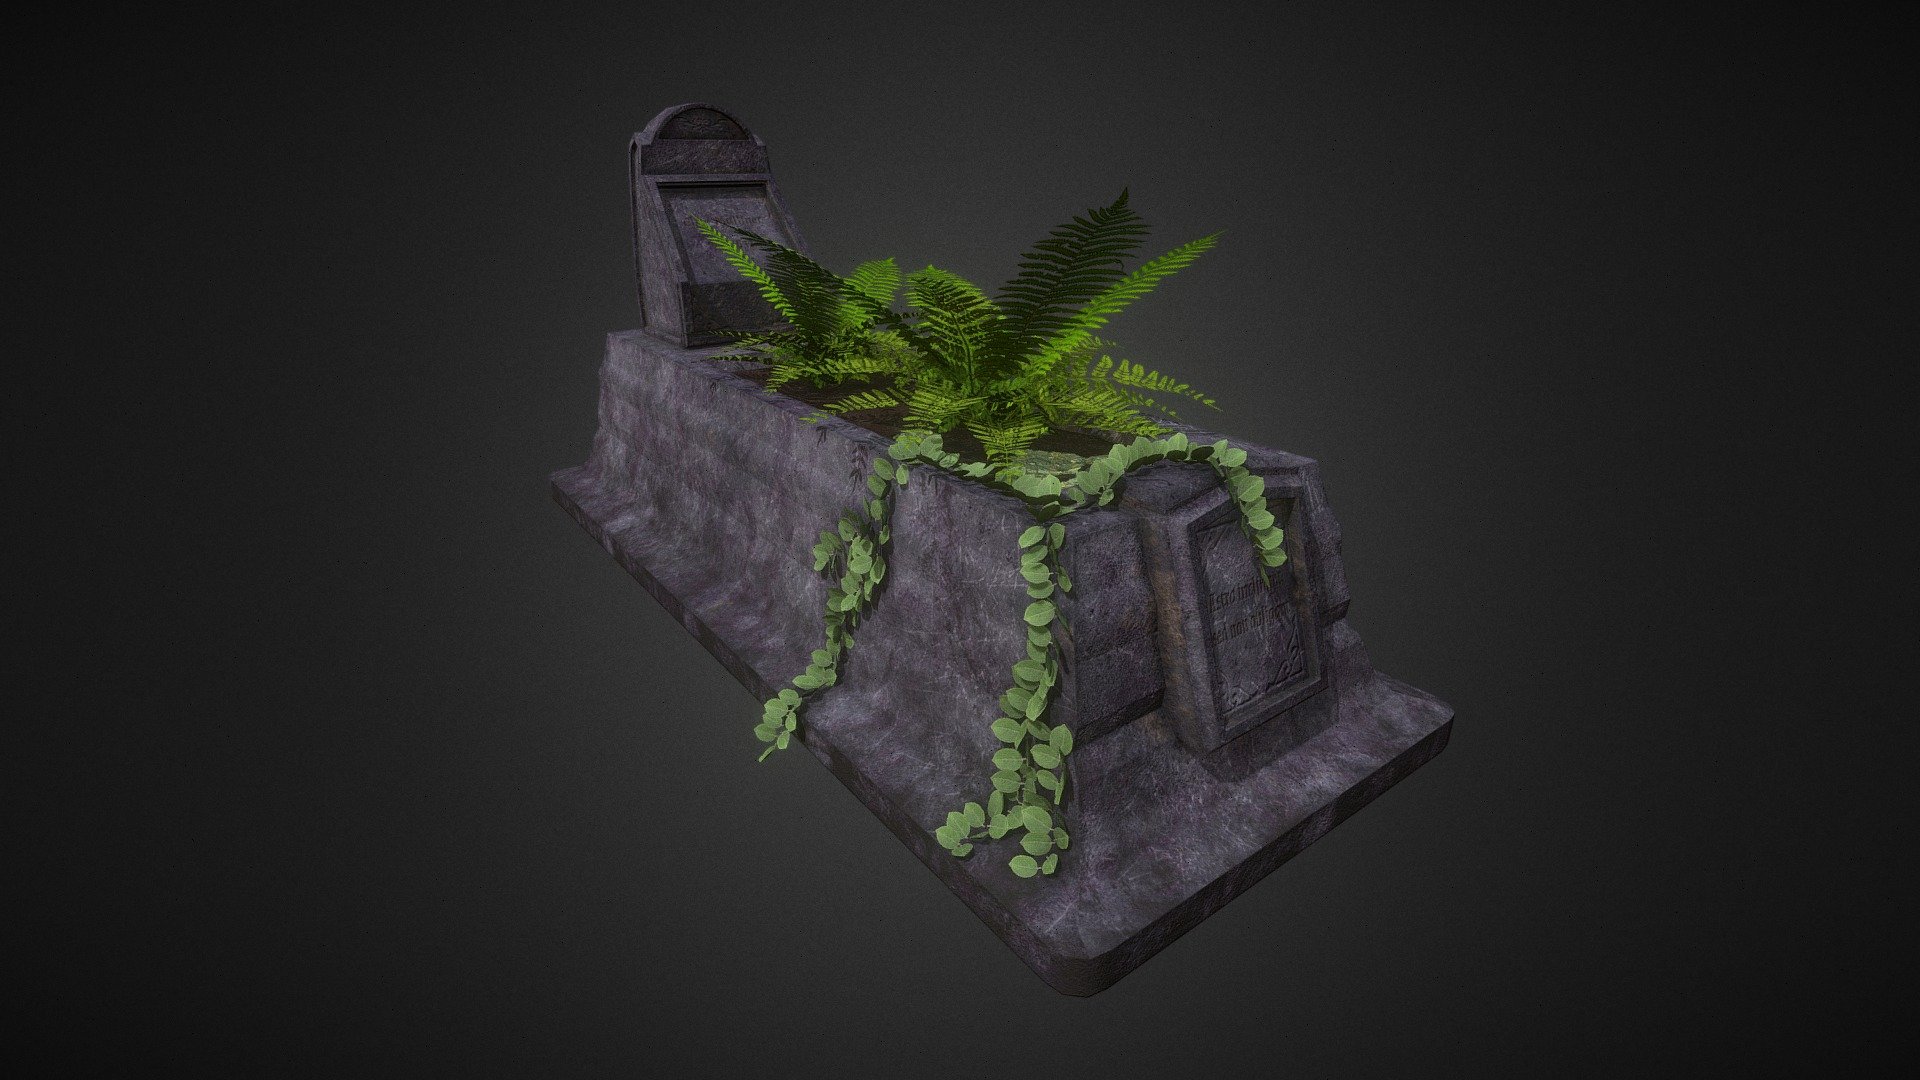 A cradle grave consists of a gravestone, a footstone, and two low stone walls connecting them, creating a rectangle designed to hold plantings to memorialize the person buried below. It resembles a bed, with a headboard and footboard, and flowers planted resemble a lovely blanket of color and texture. 

This model is low poly, and somewhat customizable. You can remove the plants, or even the dirt, since the bottom of the grave is also present and textured. 

Elsie Mulliner rests here, as an Imaginary person that lived from 1797 to 1832, but I could put a custom name on the gravestone at no charge; all you need to do is ask! - Victorian Cradle Grave With Plants - Buy Royalty Free 3D model by Egor Krylkov (@Kryl21) 3d model